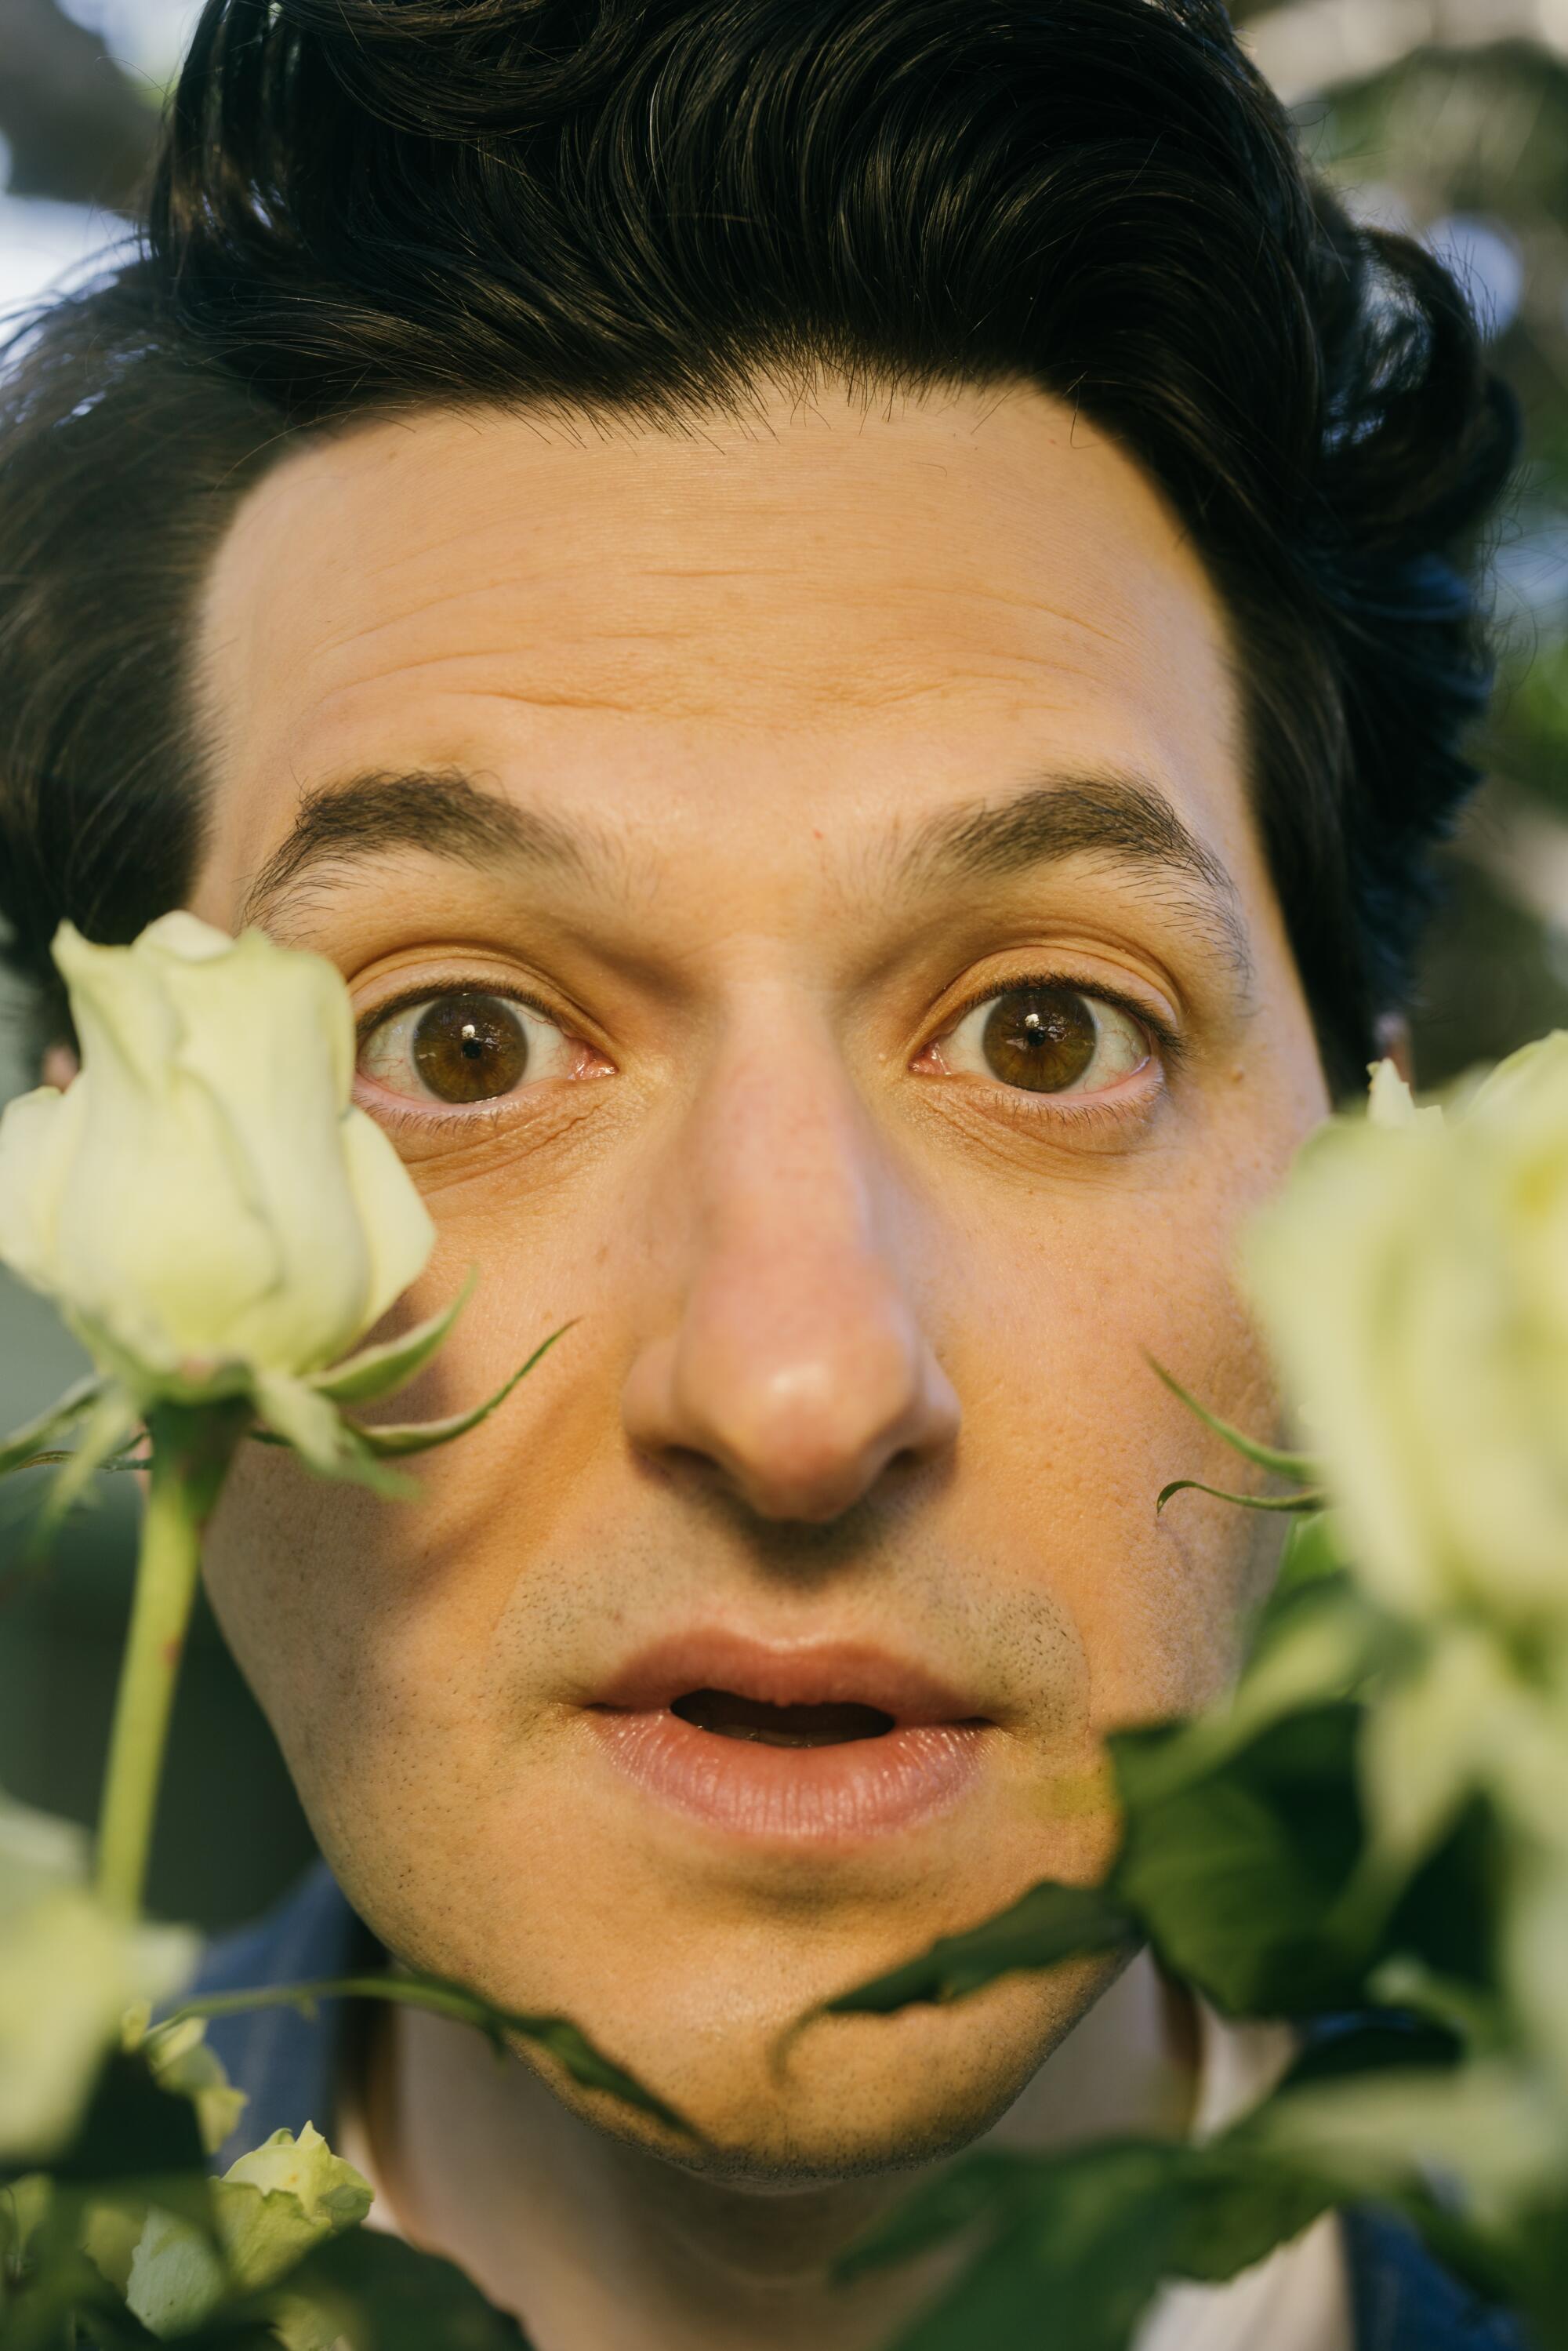 Ben Schwartz photographed at a private residence.